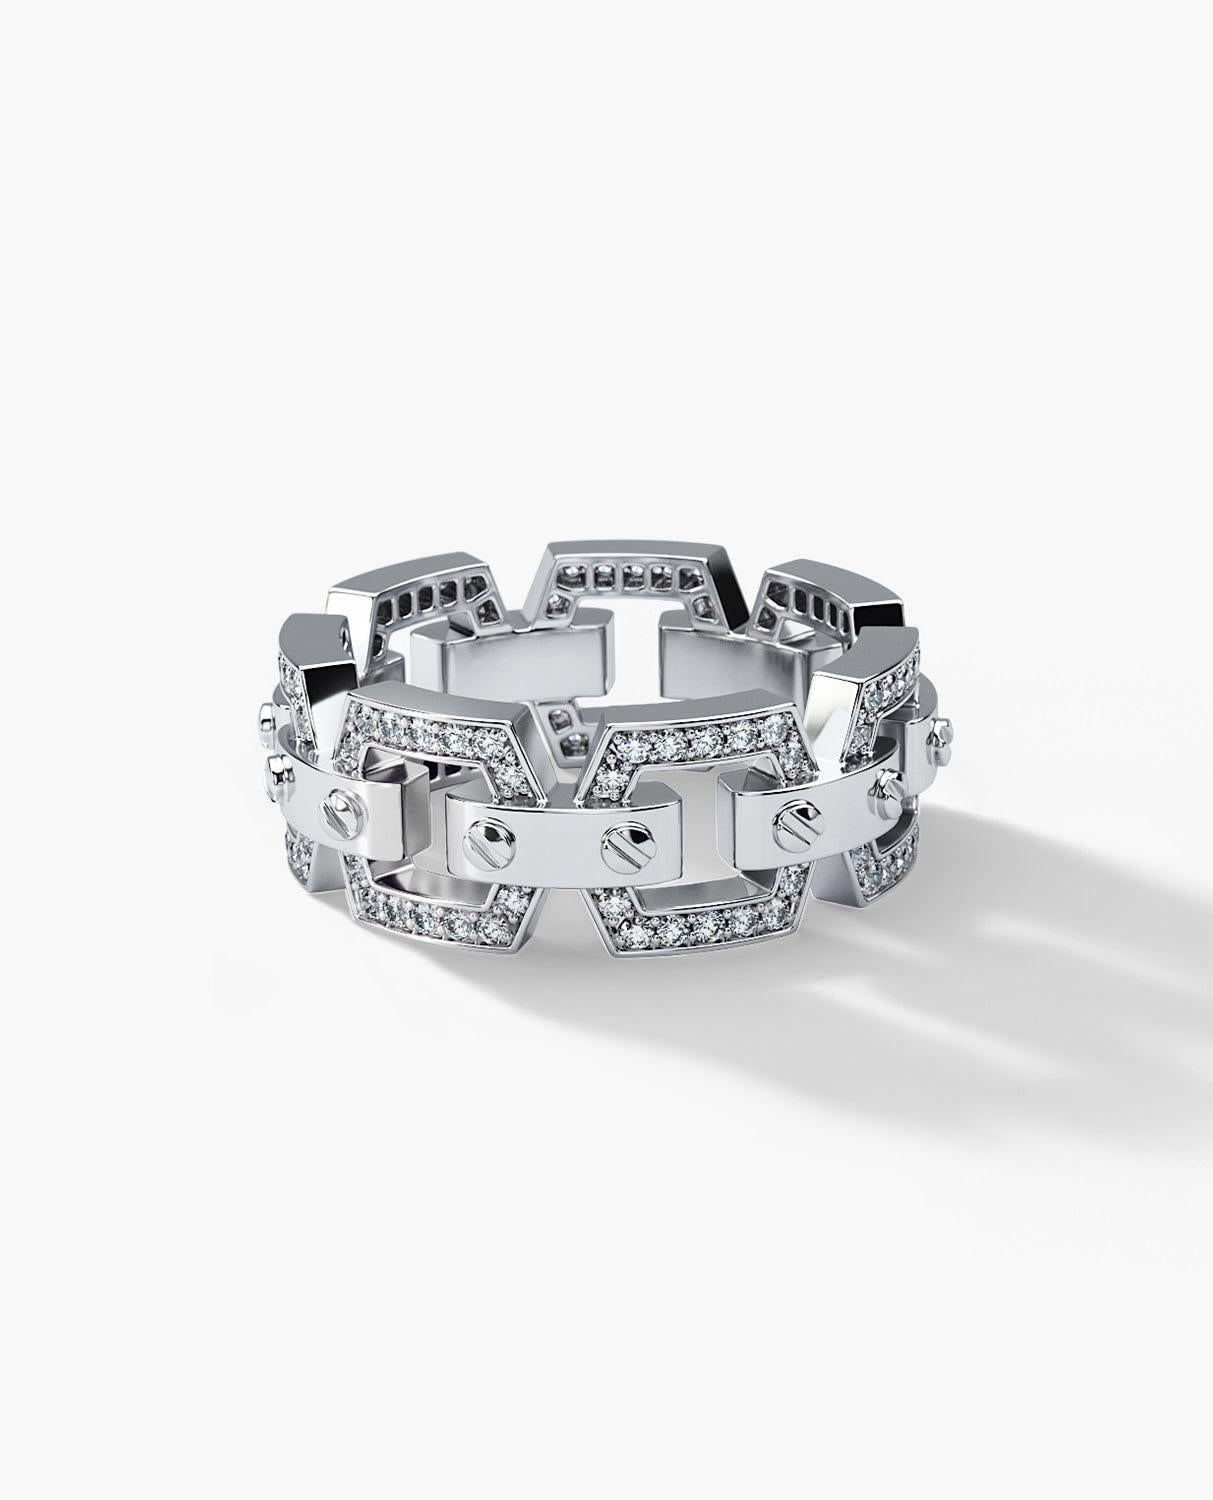 Contemporary NORTHSTAR 14k White Gold Ring with 0.50ct Diamonds